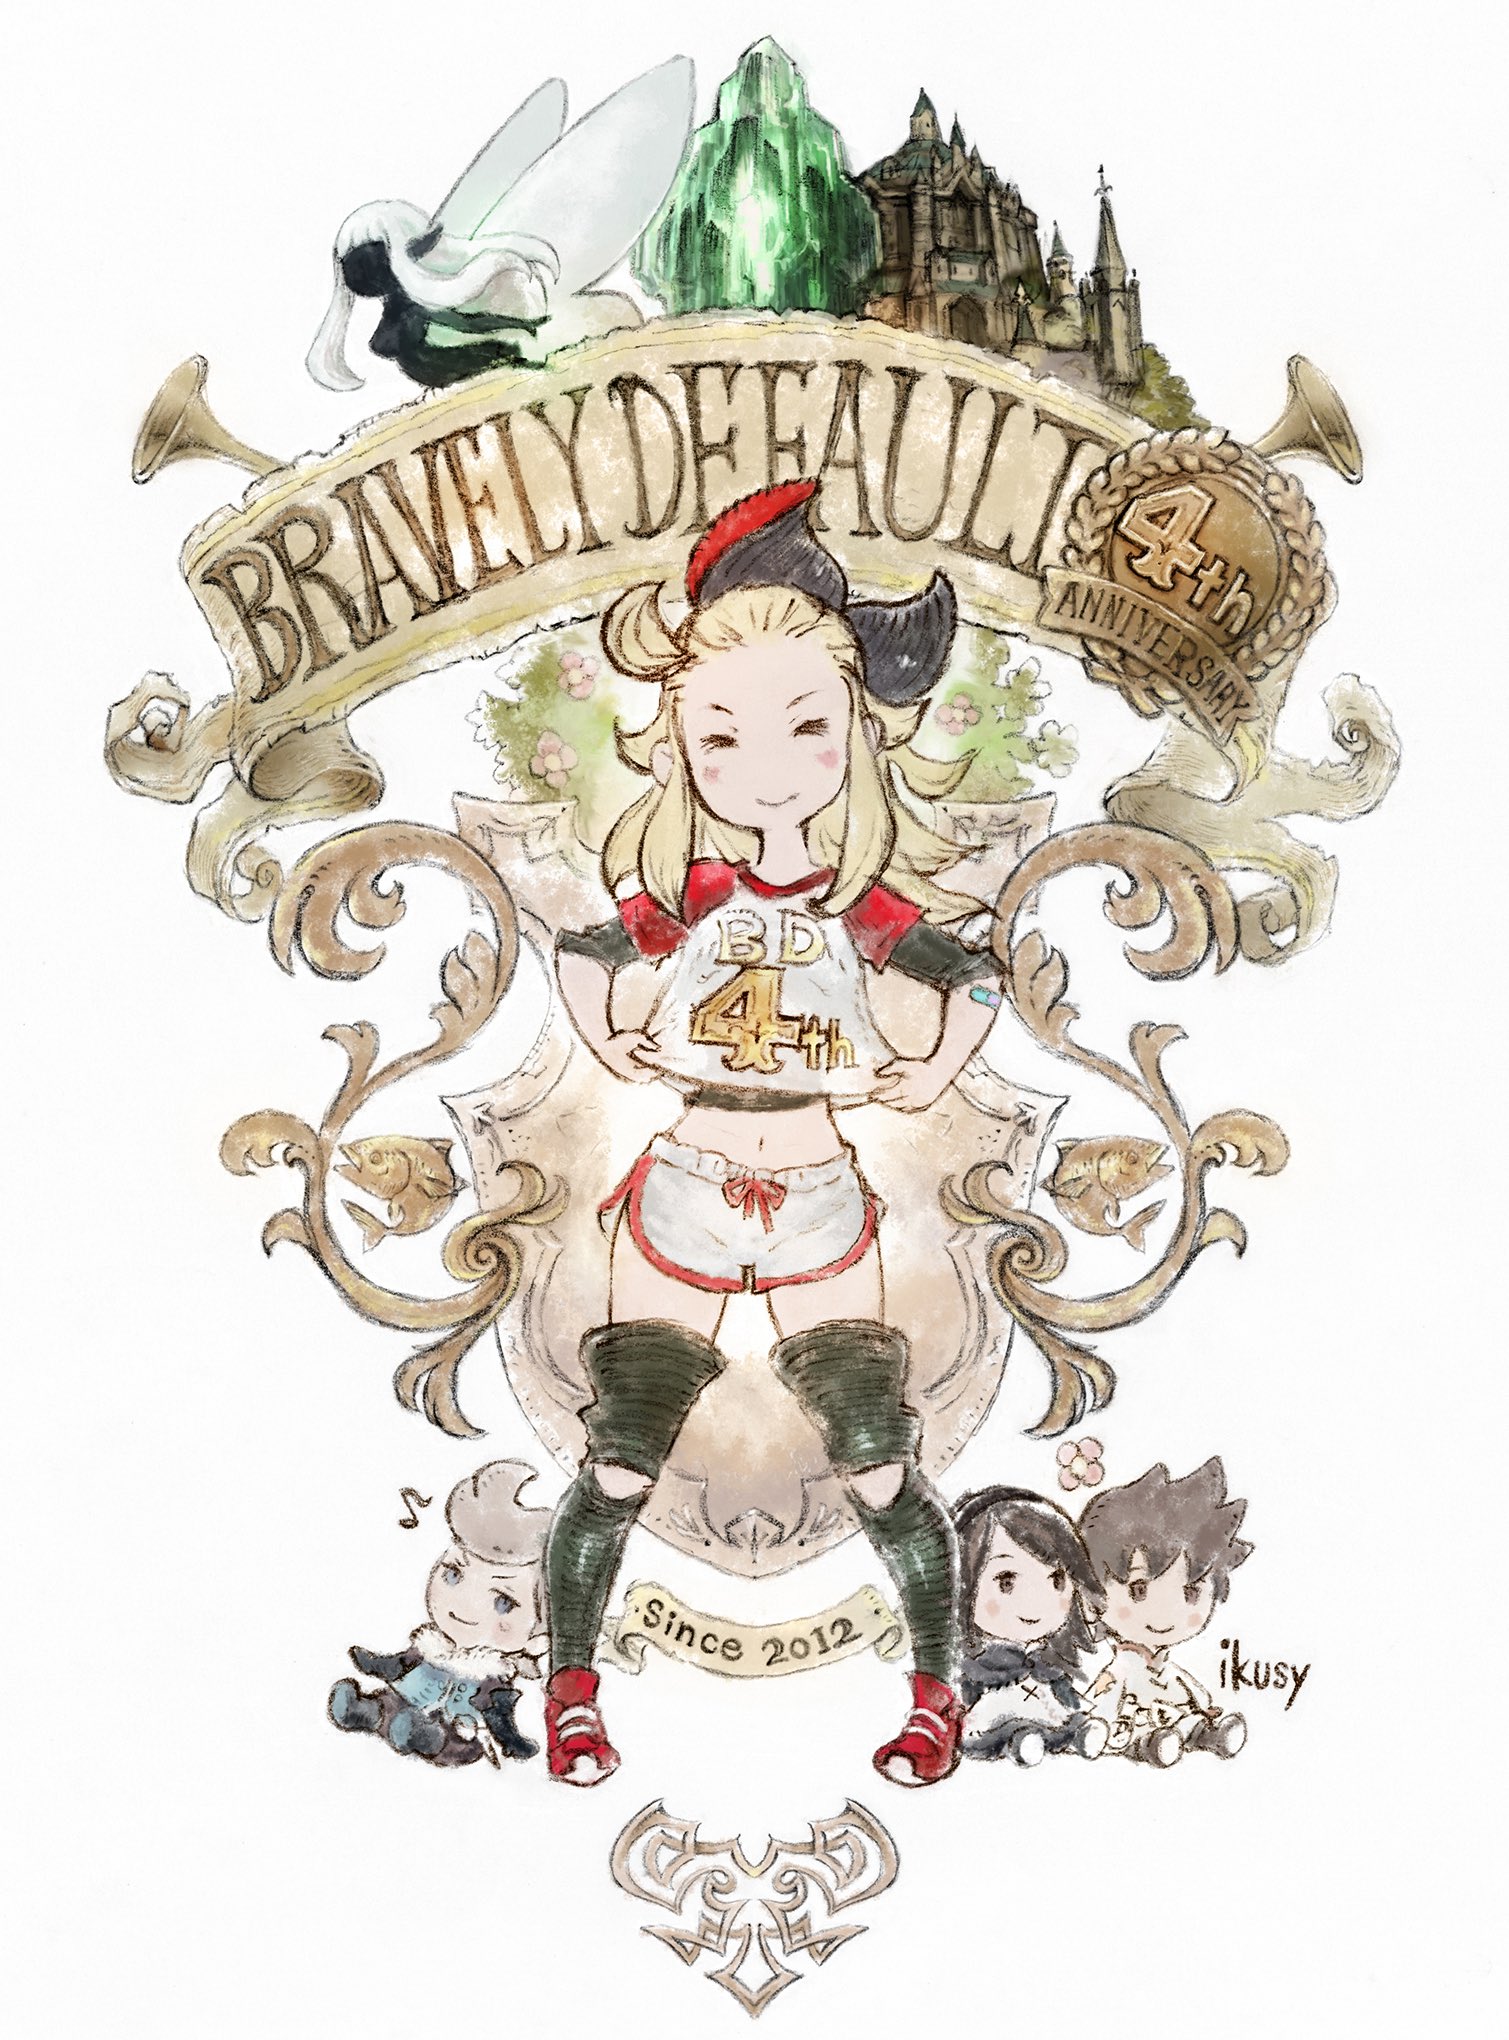 bravely default second third fourth anniversary teaser square enix